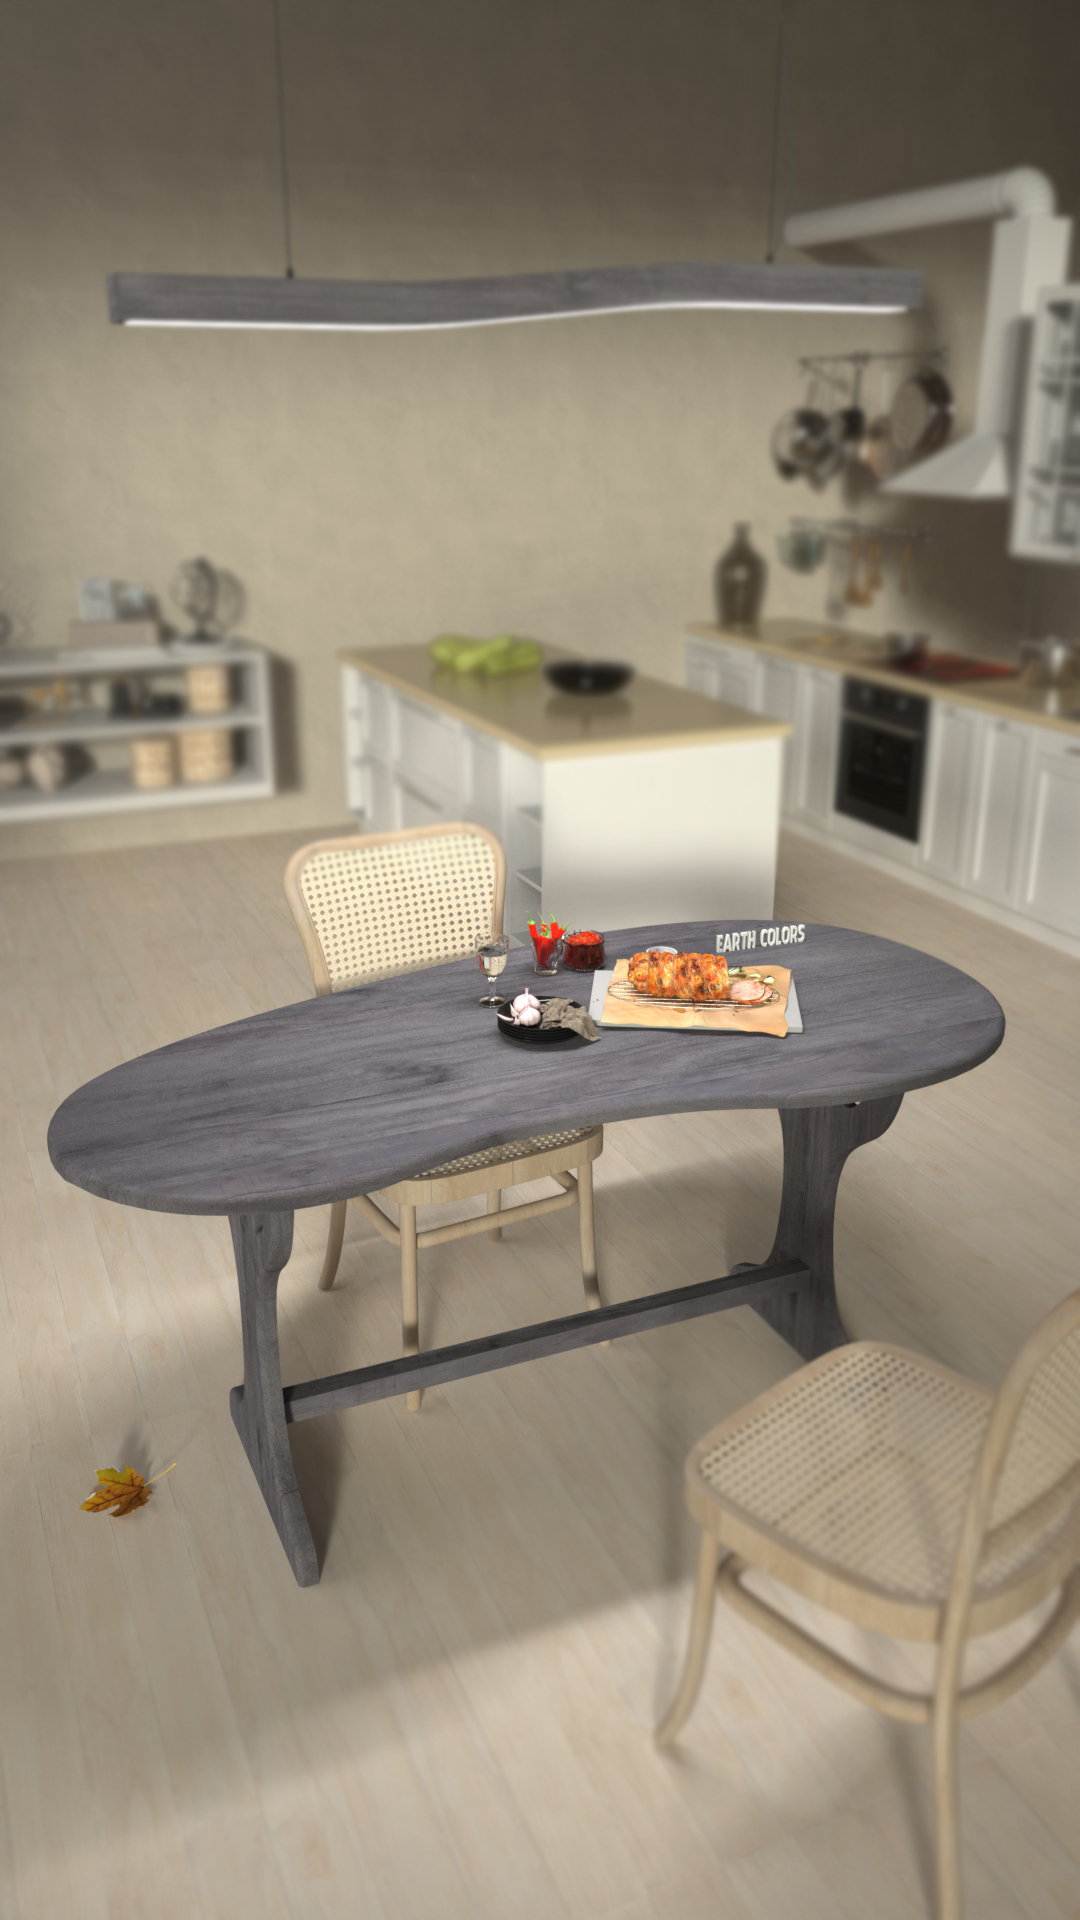 Cheap wood table tops